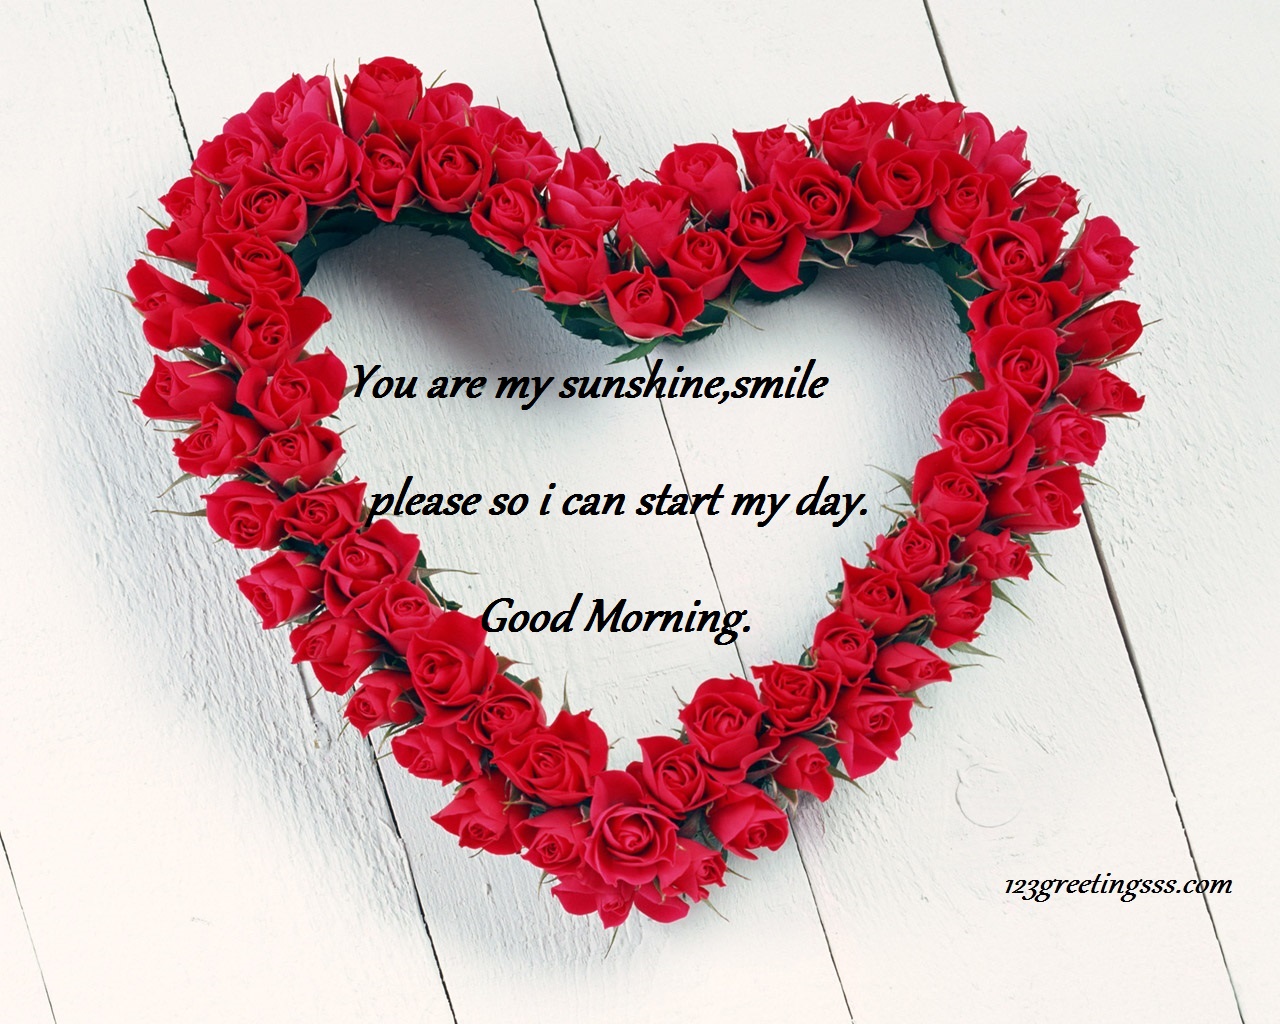 47+ Good Morning Heart Images, Good Morning Image With Heart